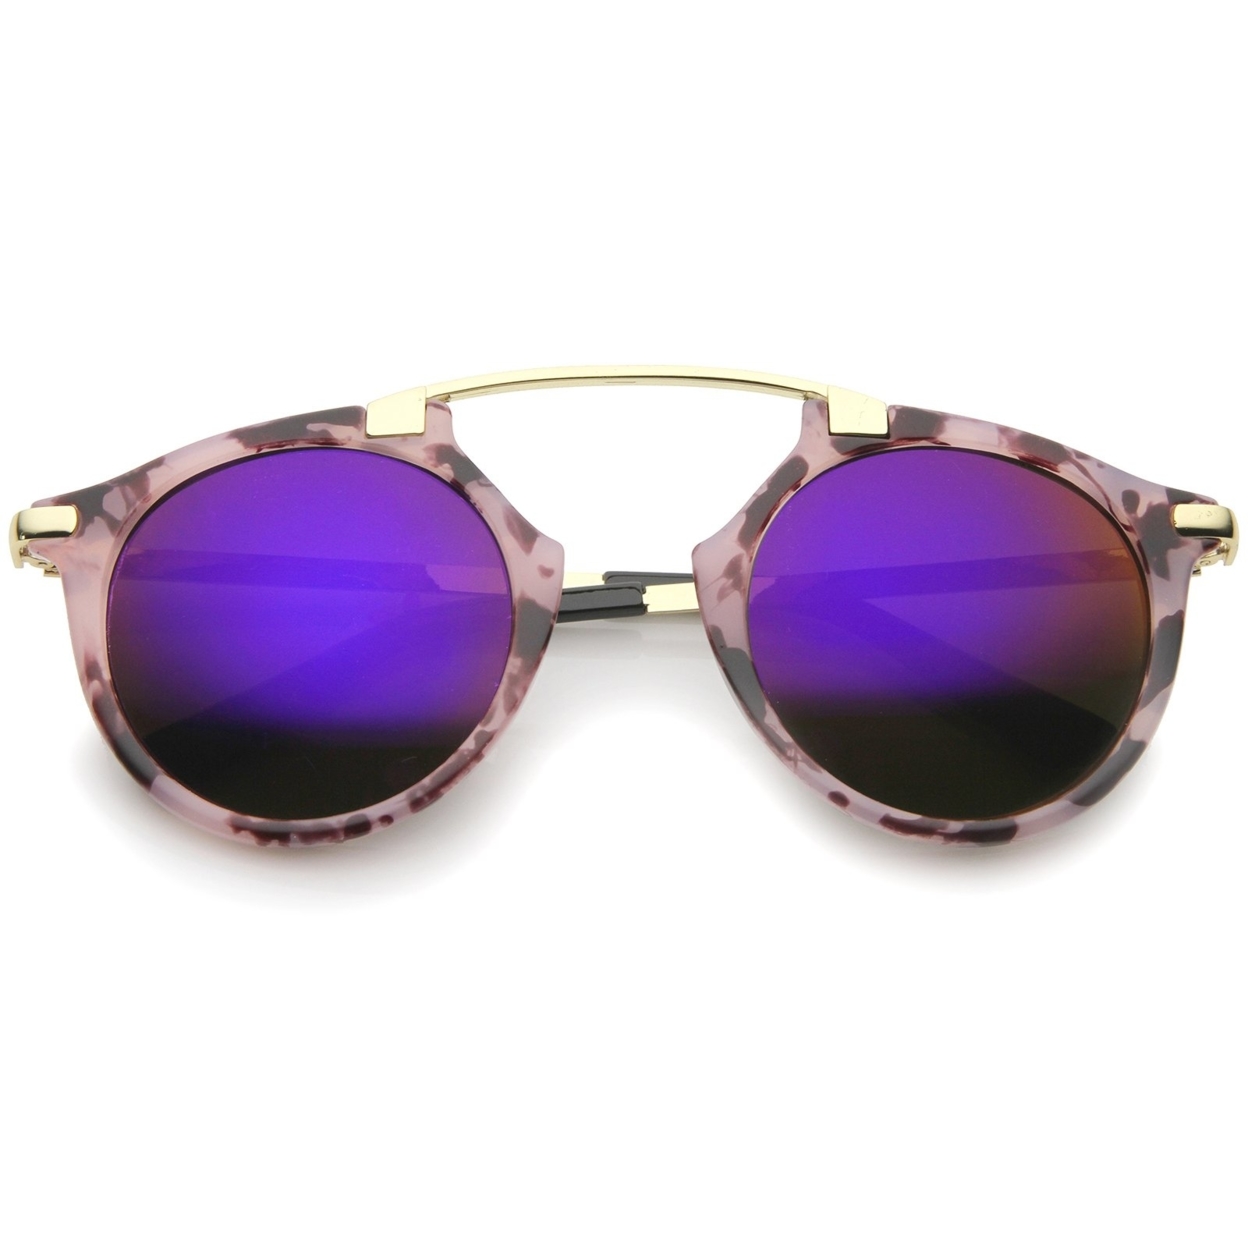 High Fashion Arched Marble Color Frame Color Mirror Pantos Aviator Sunglasses 48mm - Black-Gold / Smoke